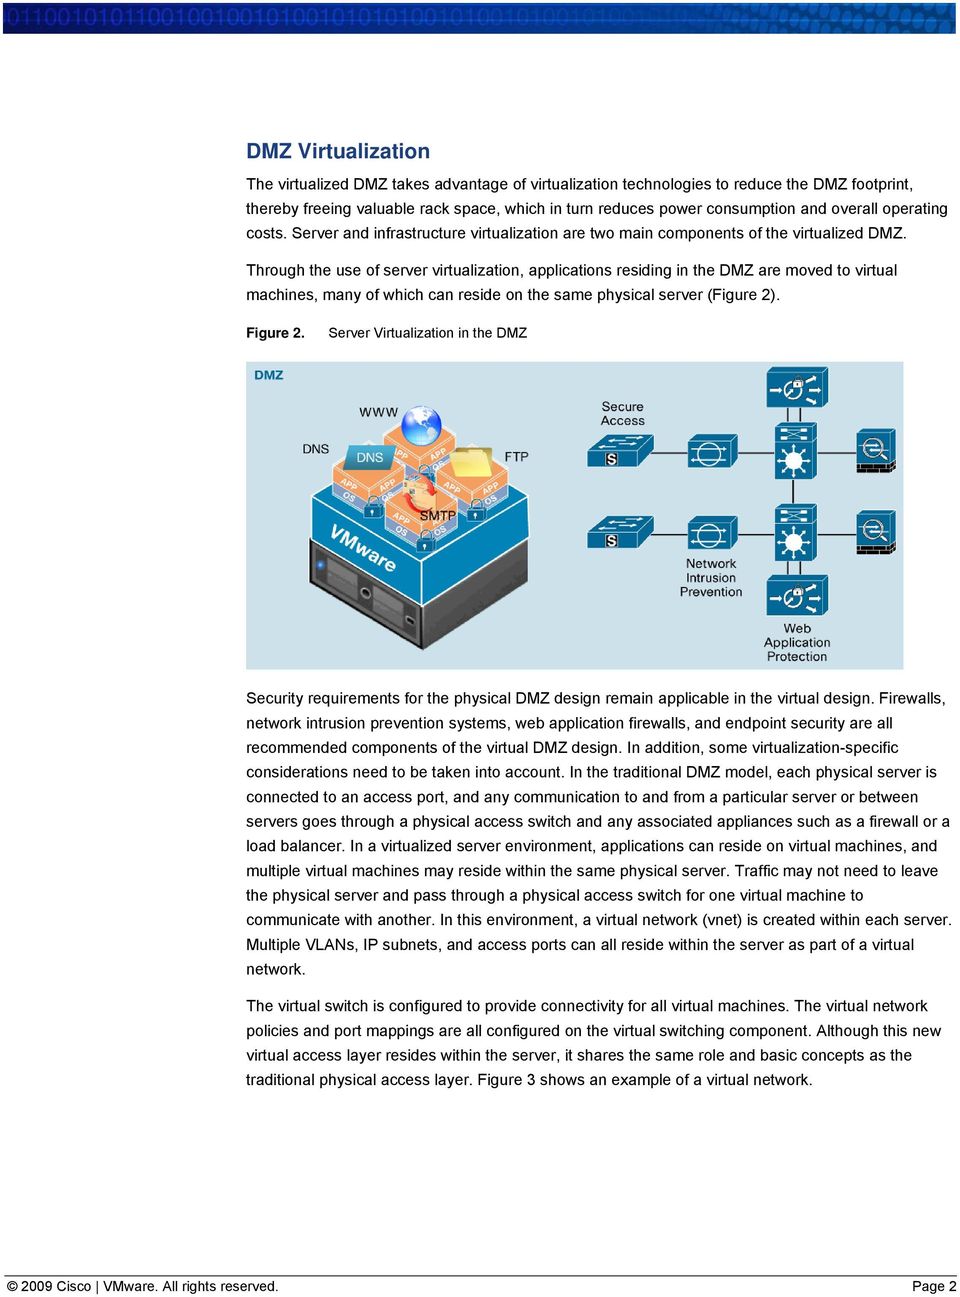 Through the use of server virtualization, applications residing in the DMZ are moved to virtual machines, many of which can reside on the same physical server (Figure 2). Figure 2.